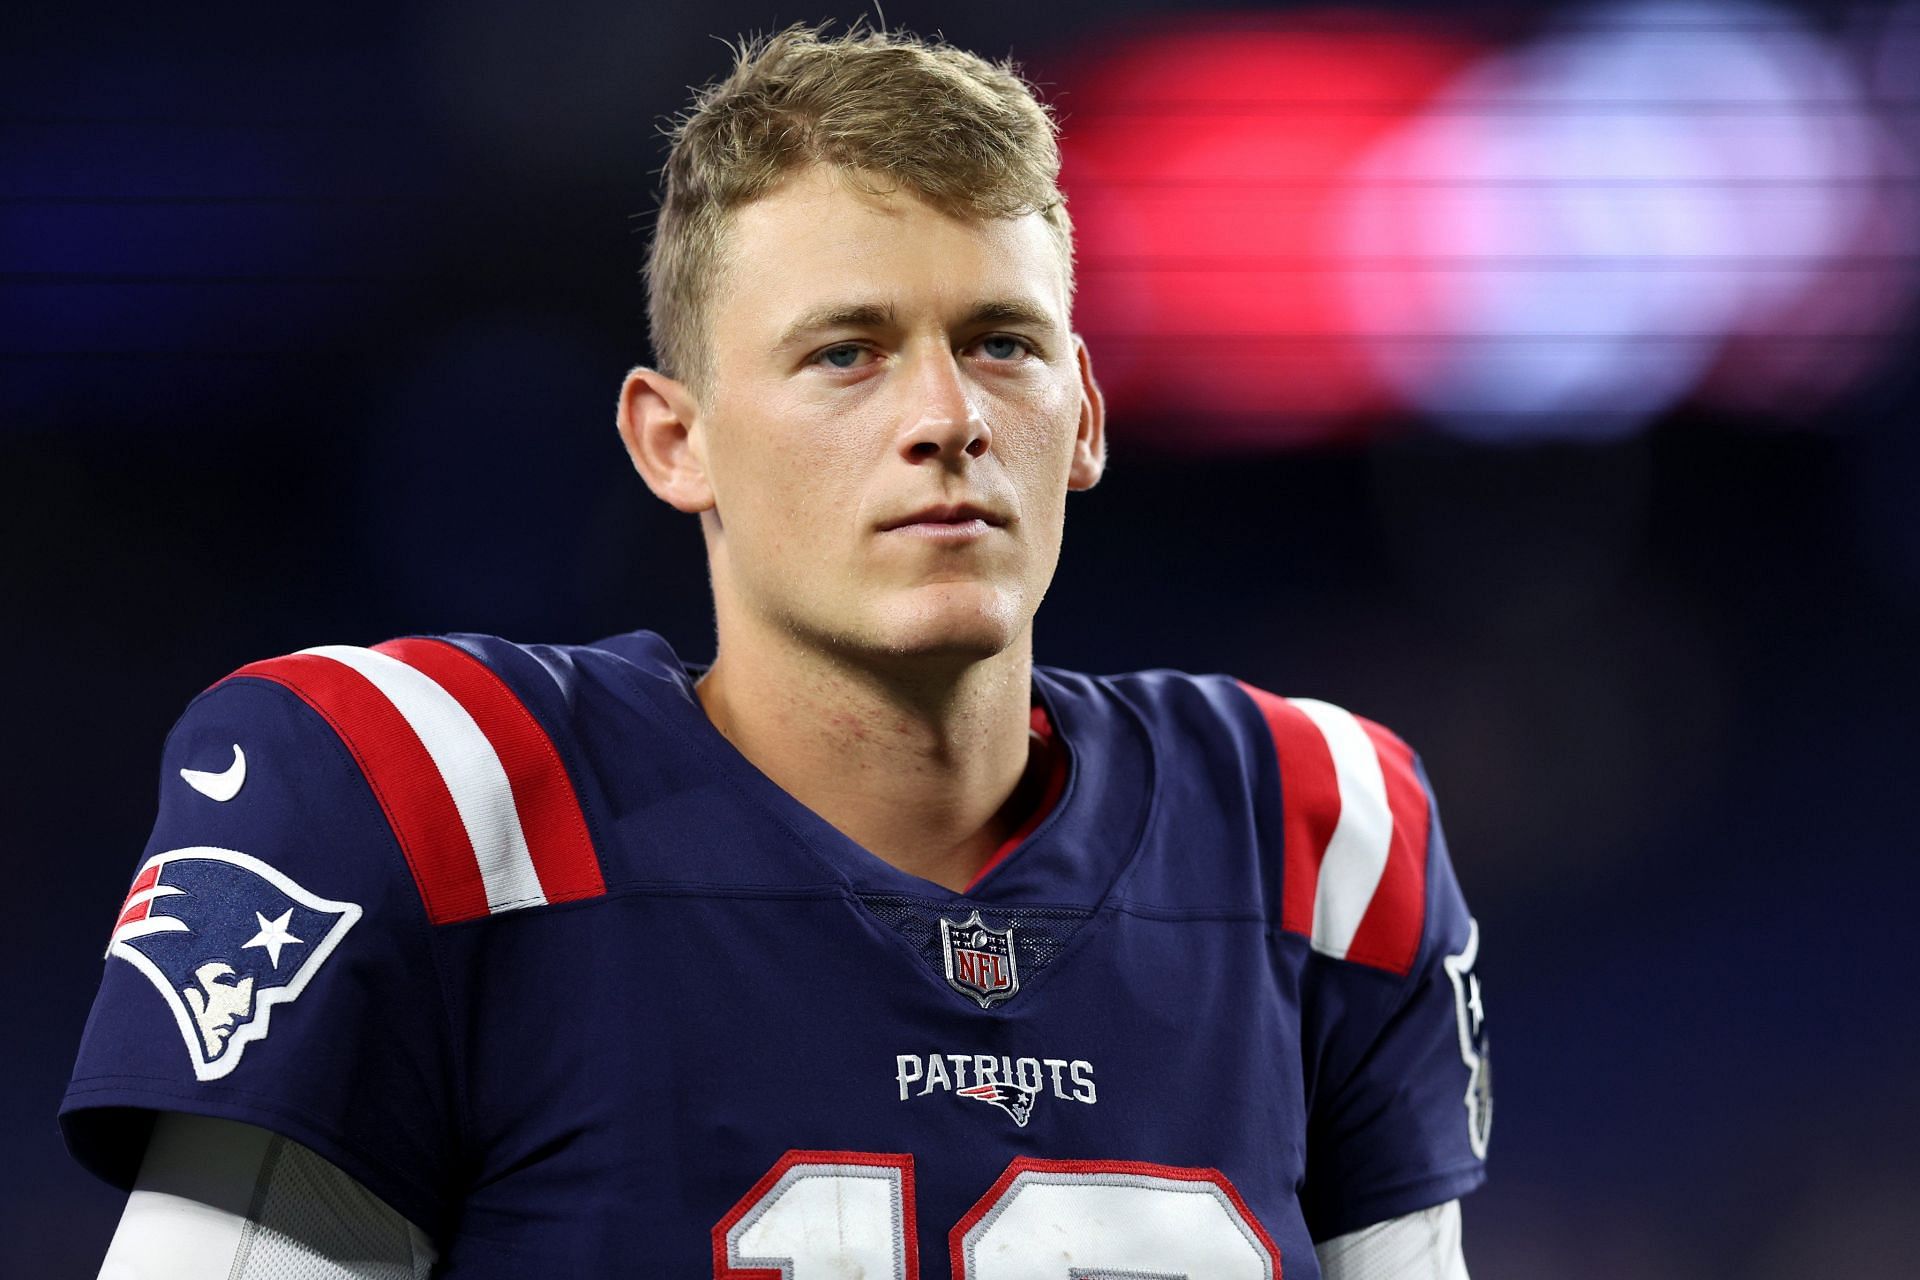 Who is the New England Patriots' starting QB tonight against the Cardinals?